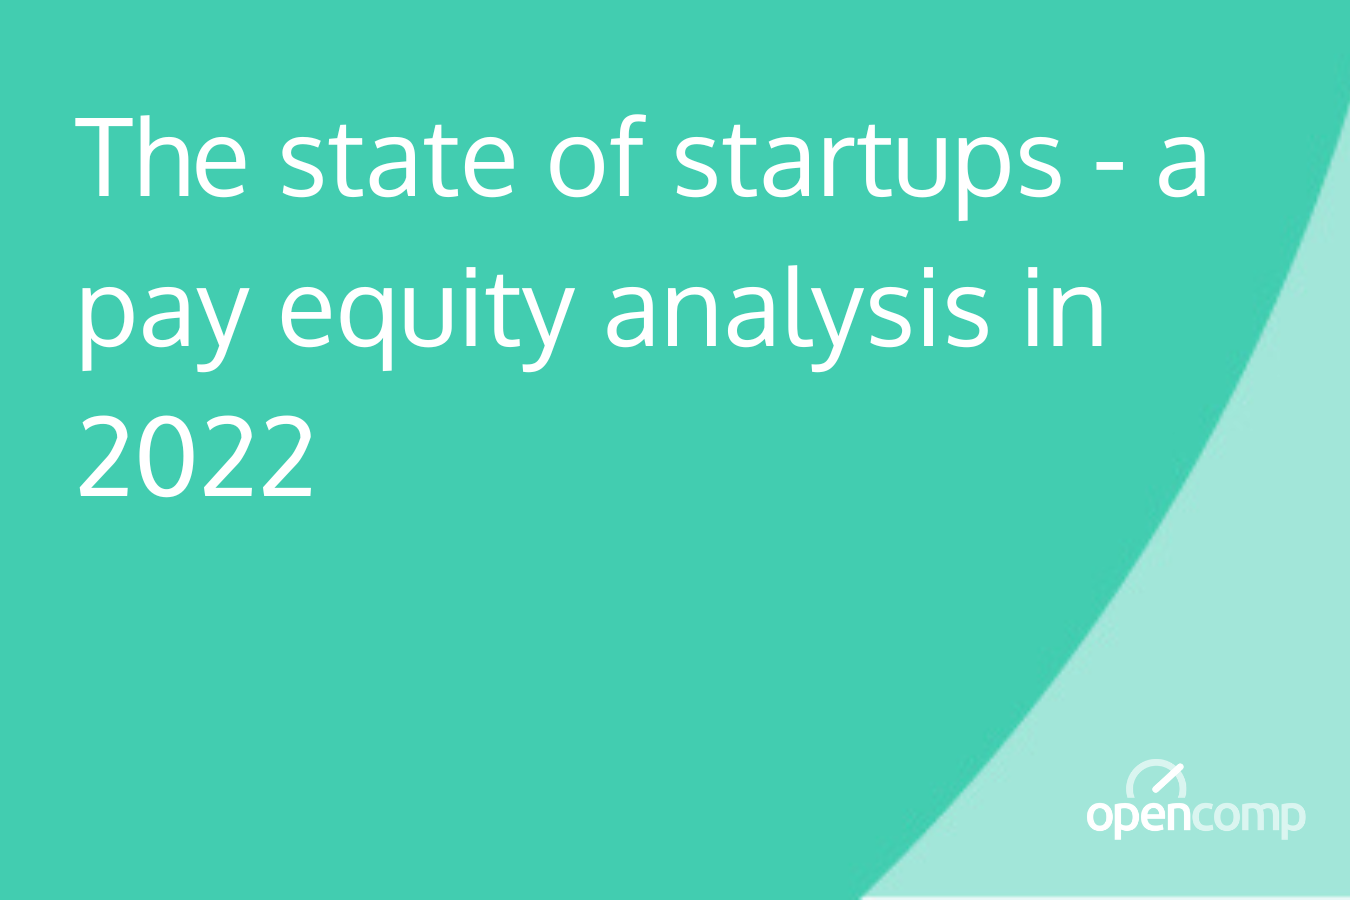 The state of startups - a pay equity analysis in 2022